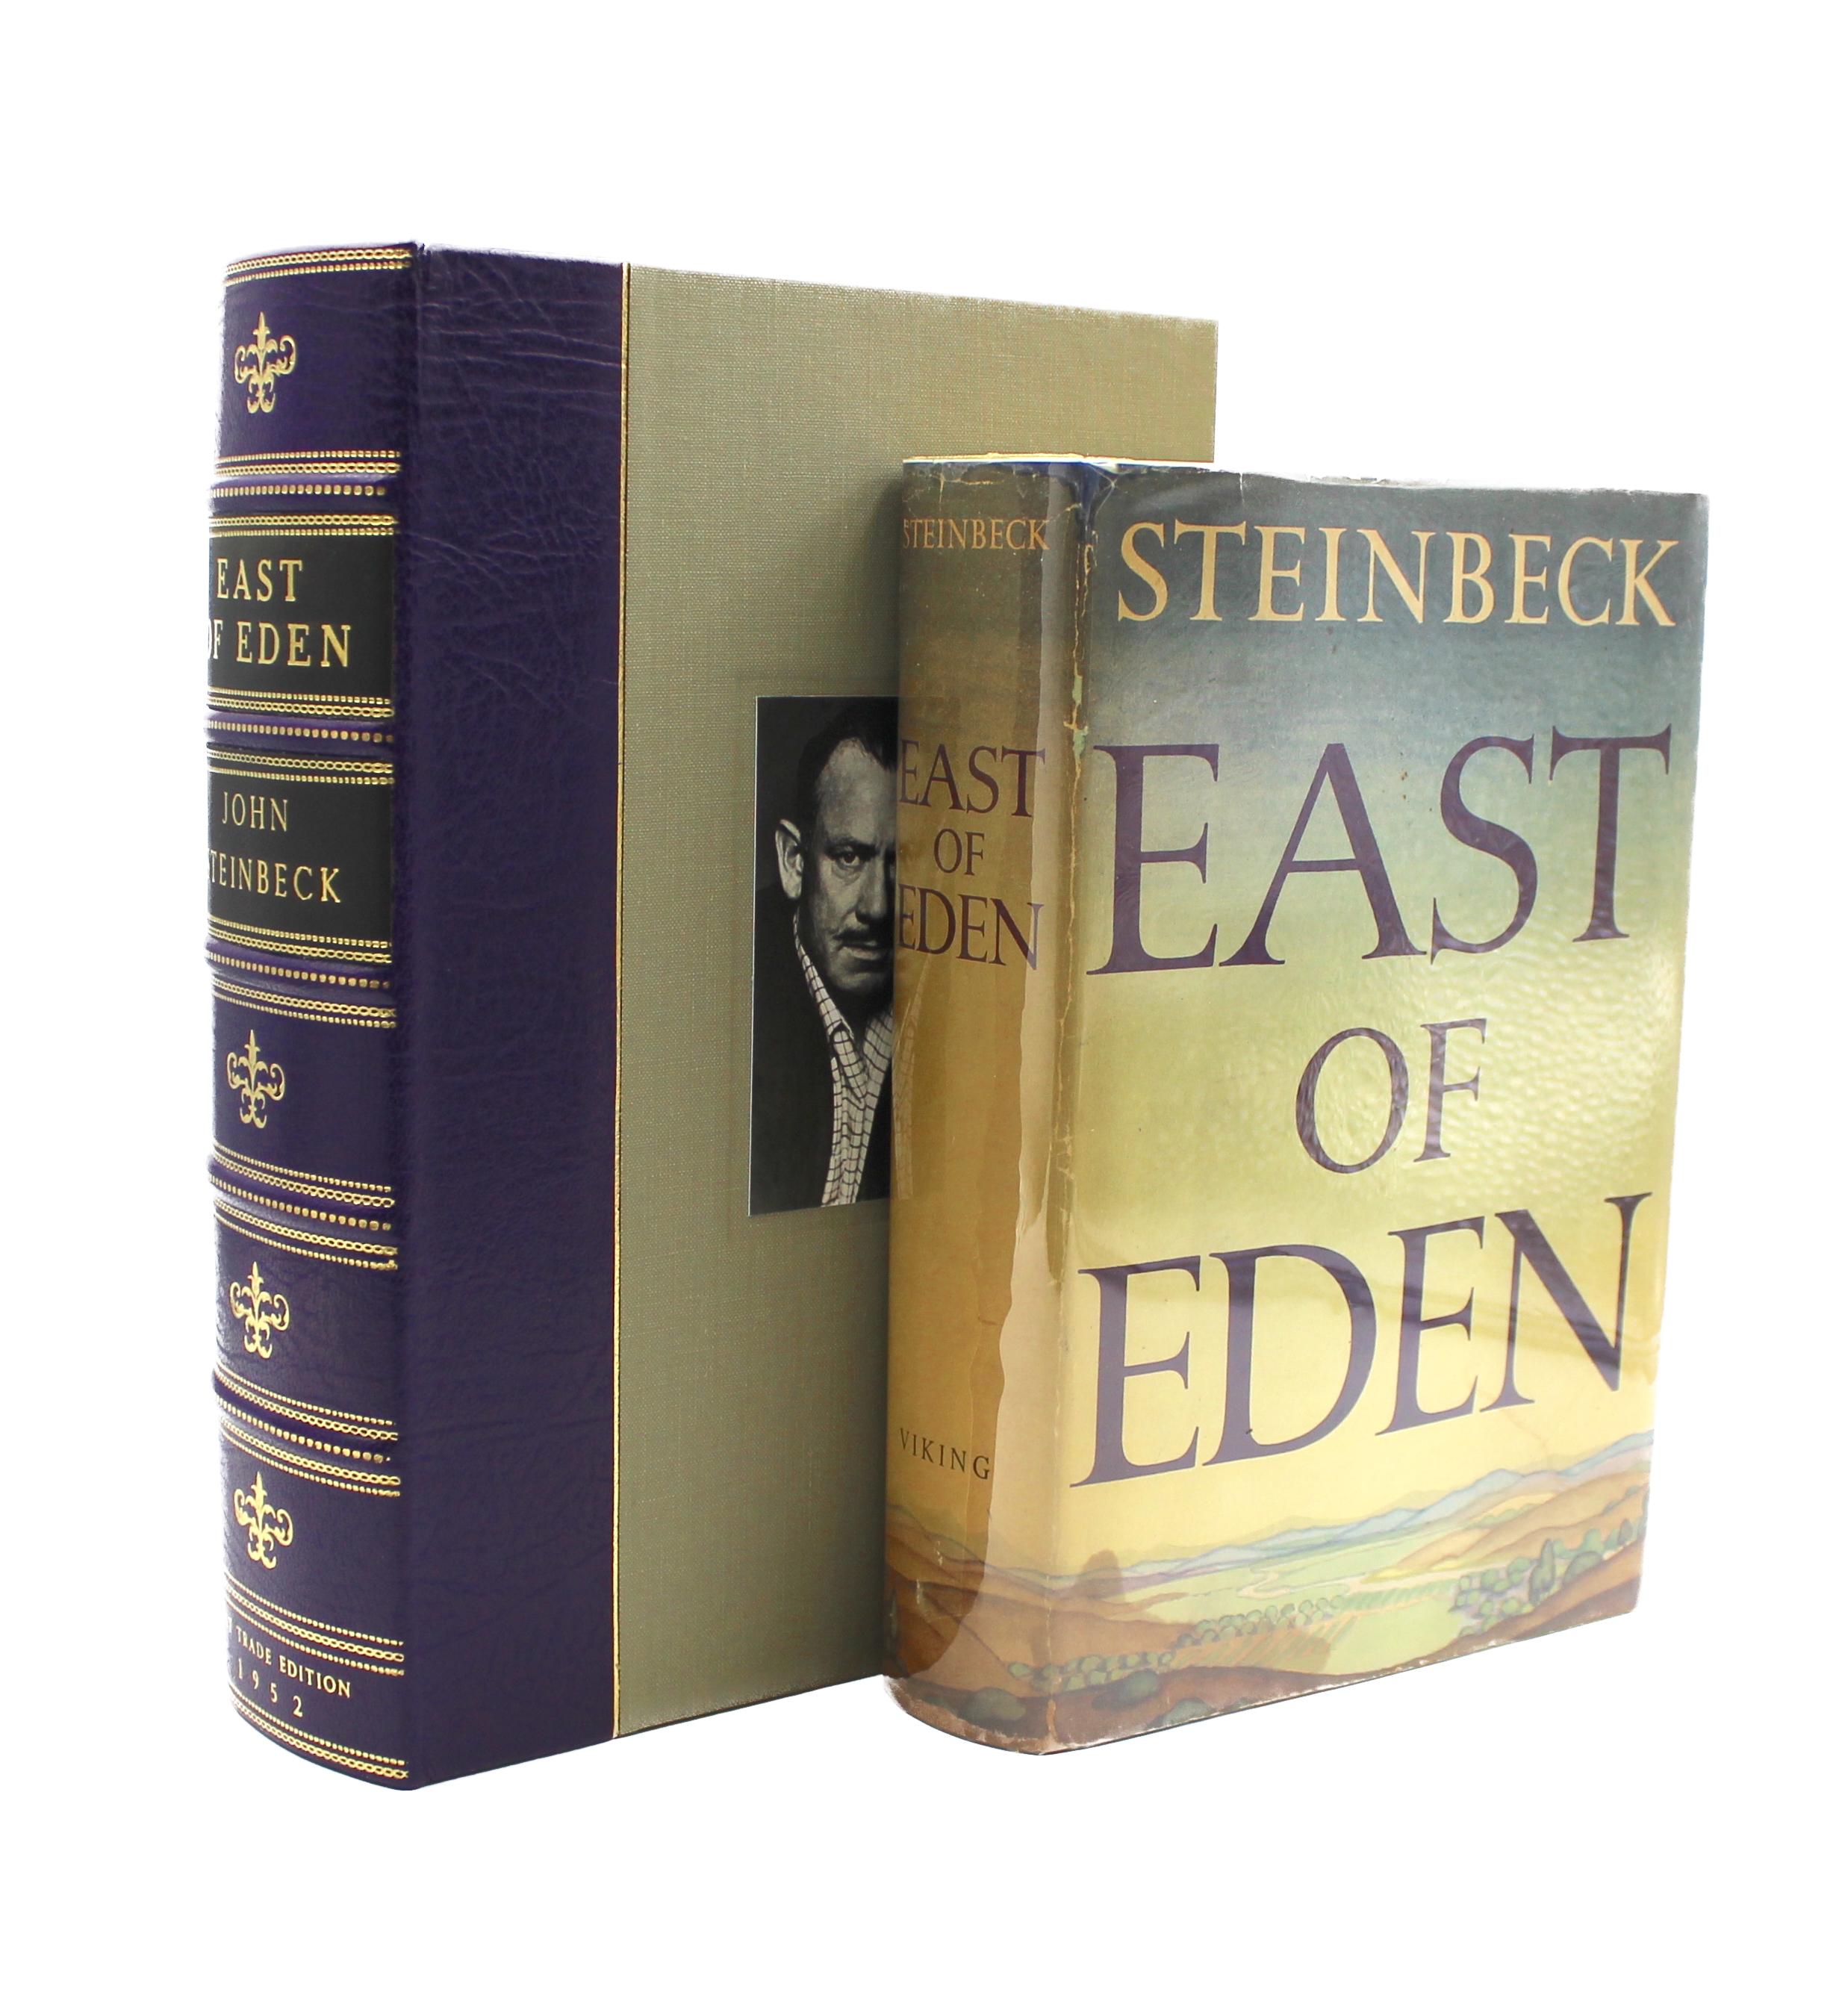 Steinbeck, John. East of Eden. New York: The Viking Press, 1952. Octavo. First trade edition, first printing. In original lime green cloth boards with green titles to the spine and original unclipped dust jacket. Presented with a new archival ¼